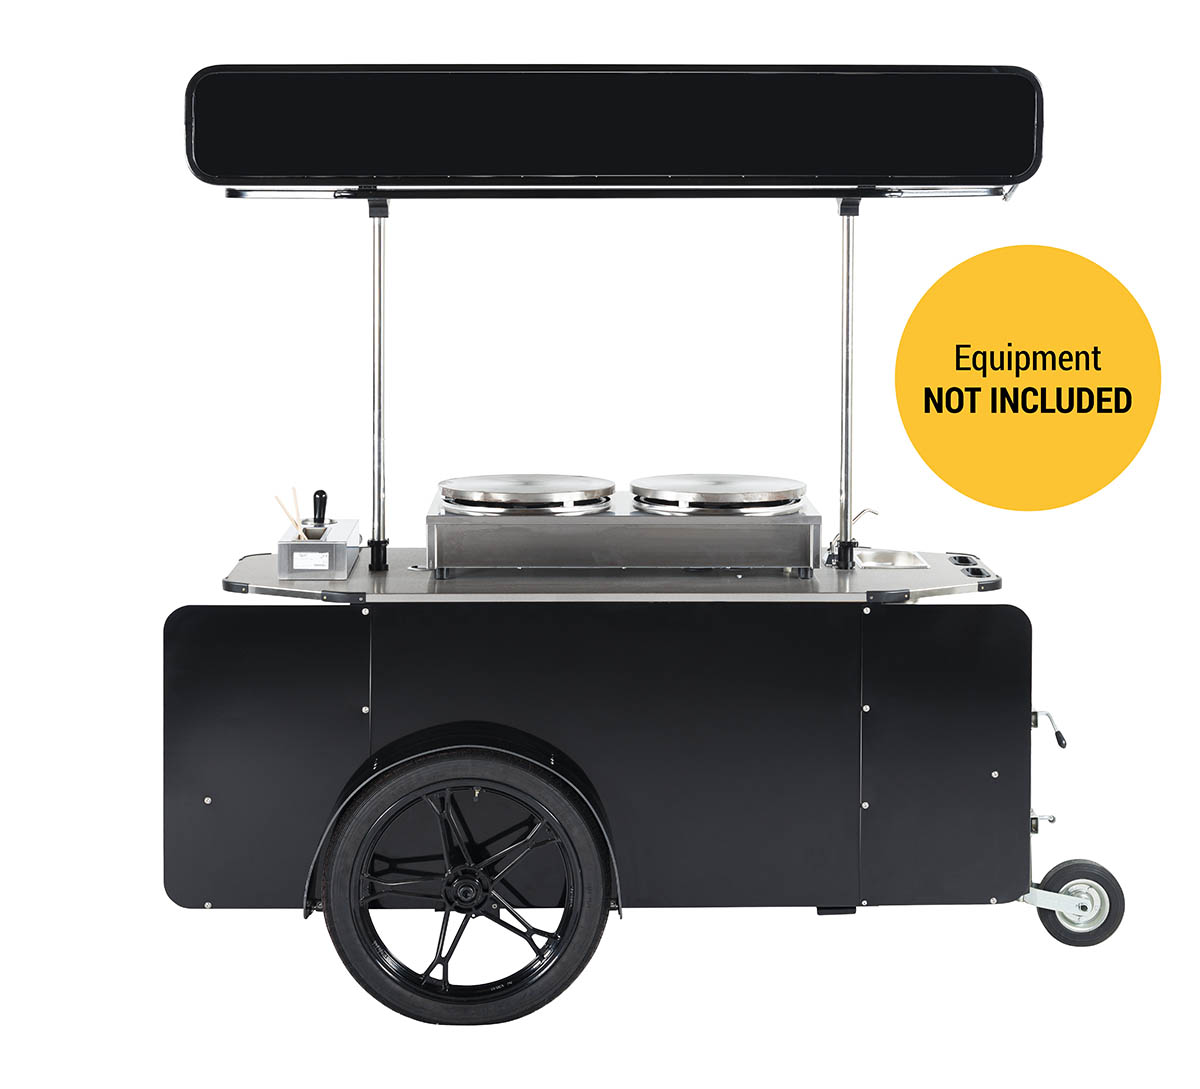 Mobile crepe cart manufactured by BizzOnWheels